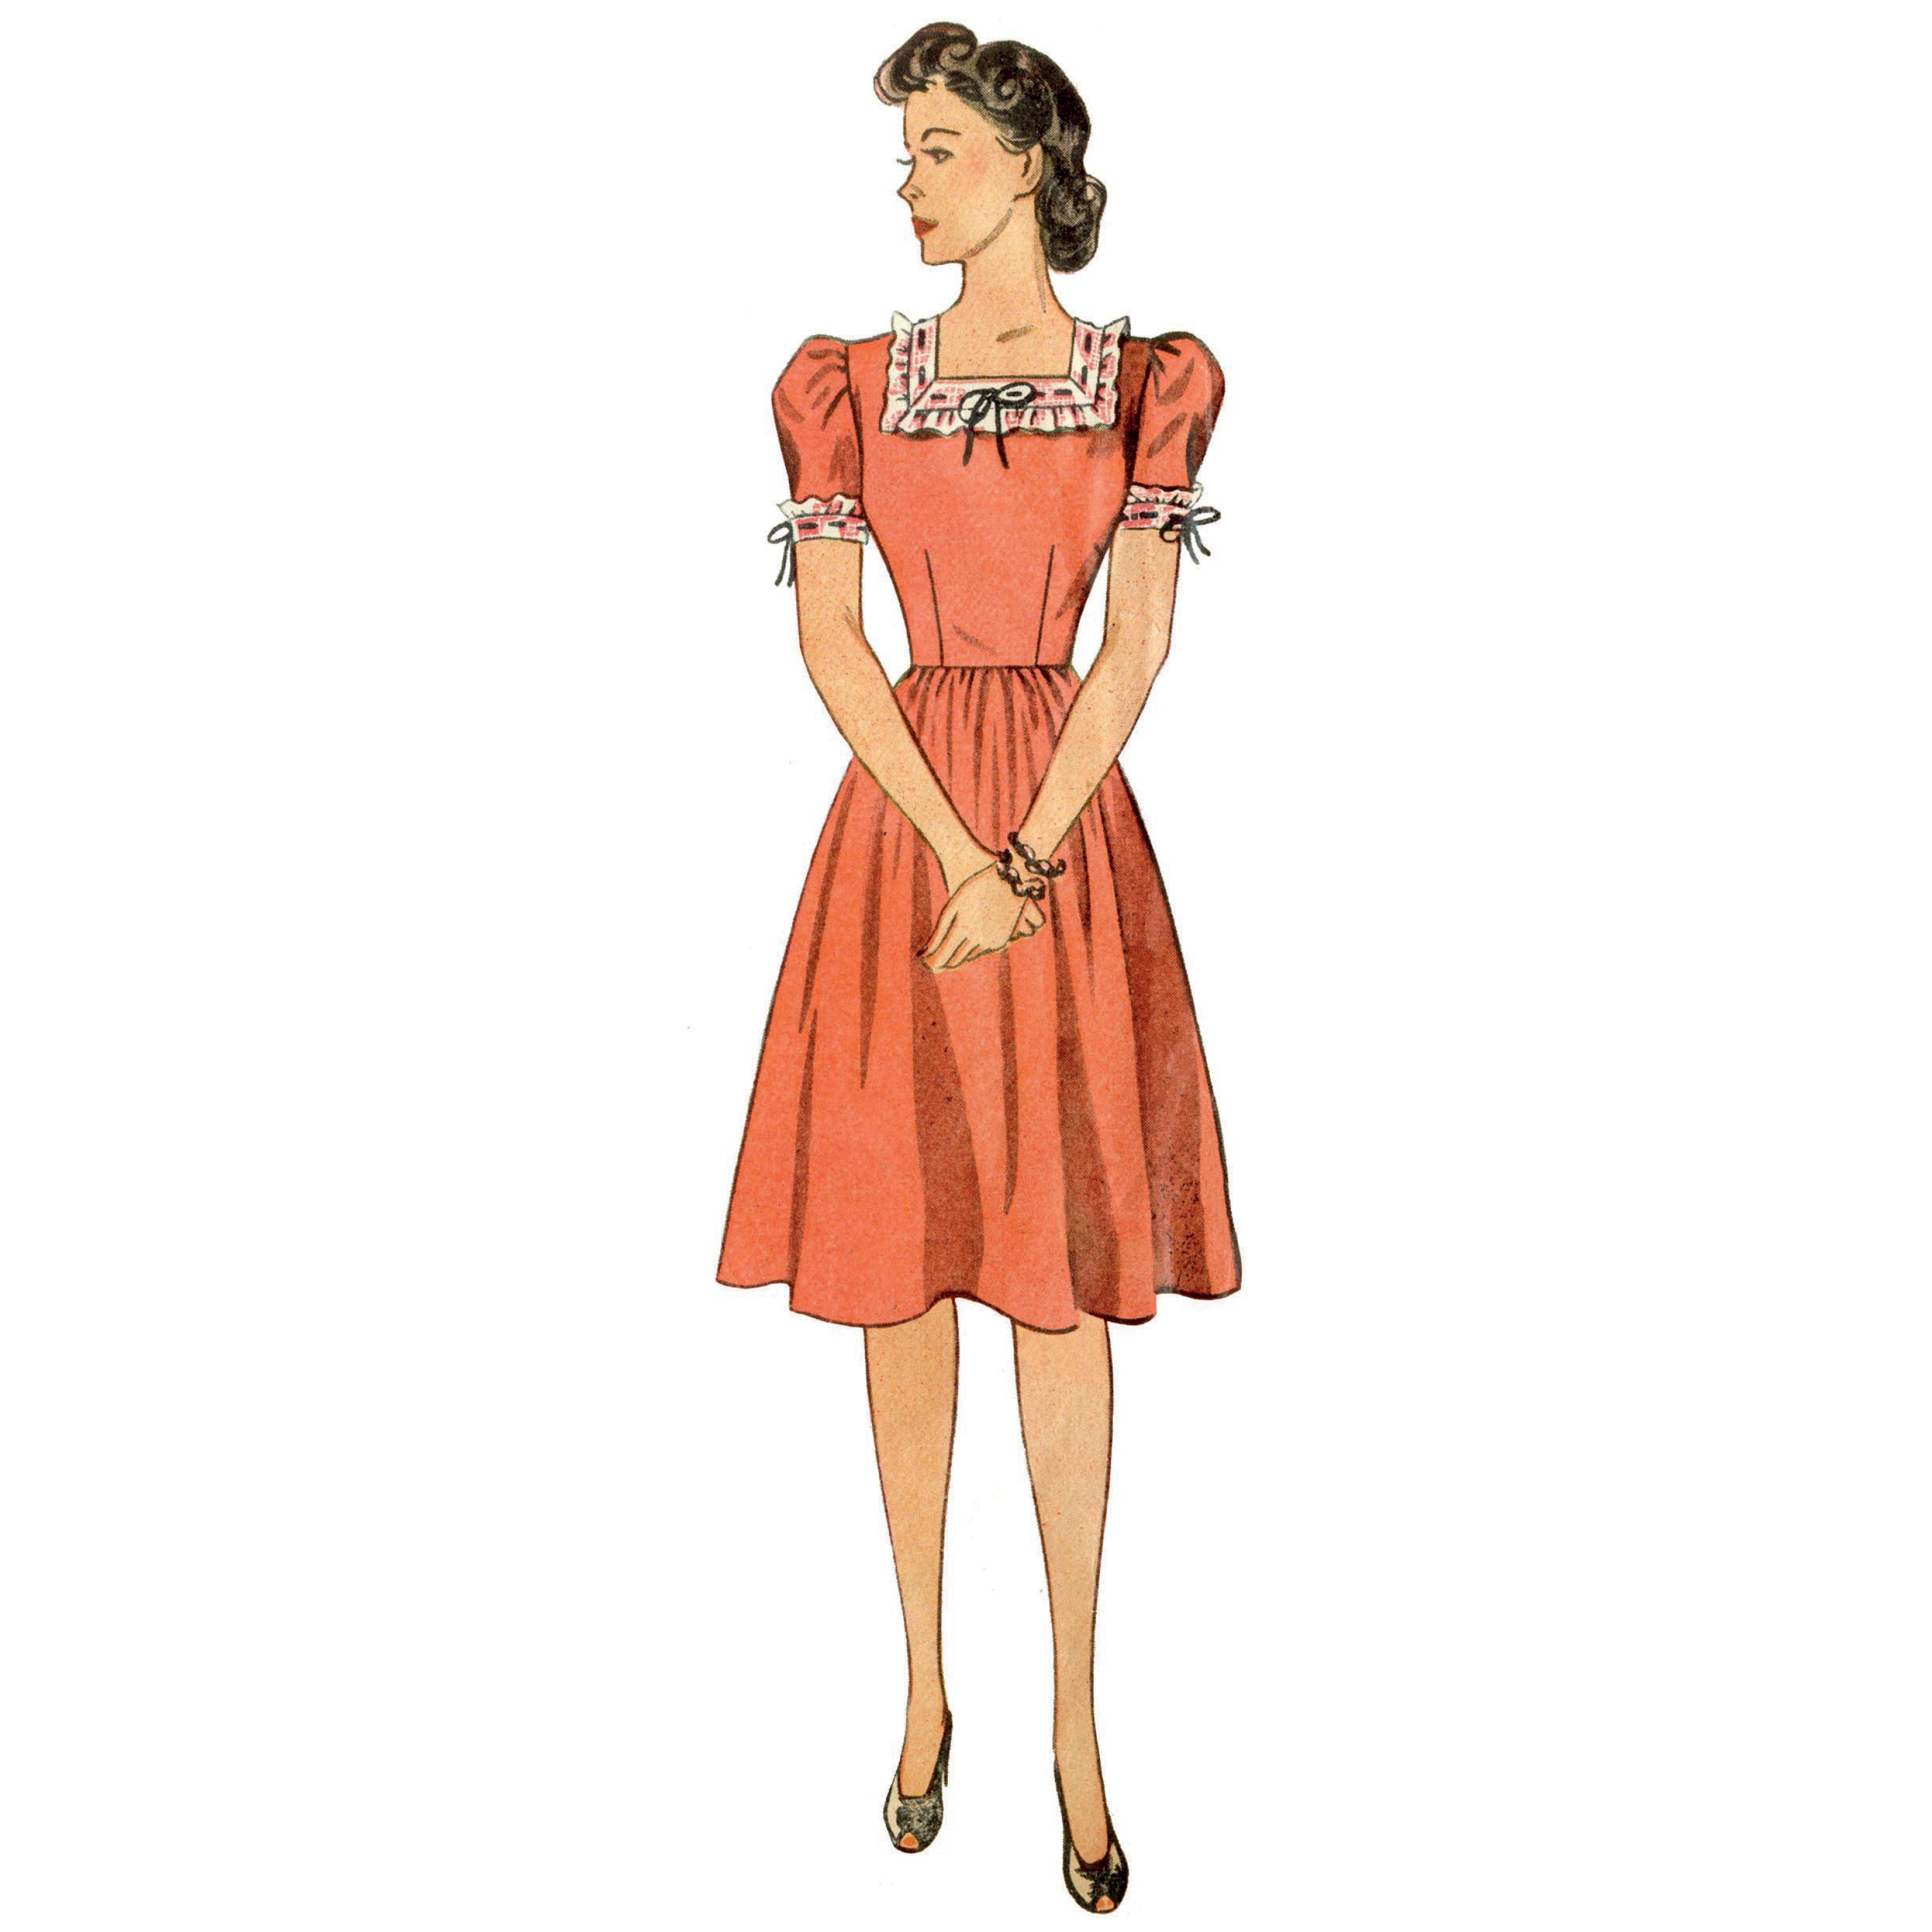 Simplicity Sewing Pattern 9464 Misses Dress from Jaycotts Sewing Supplies